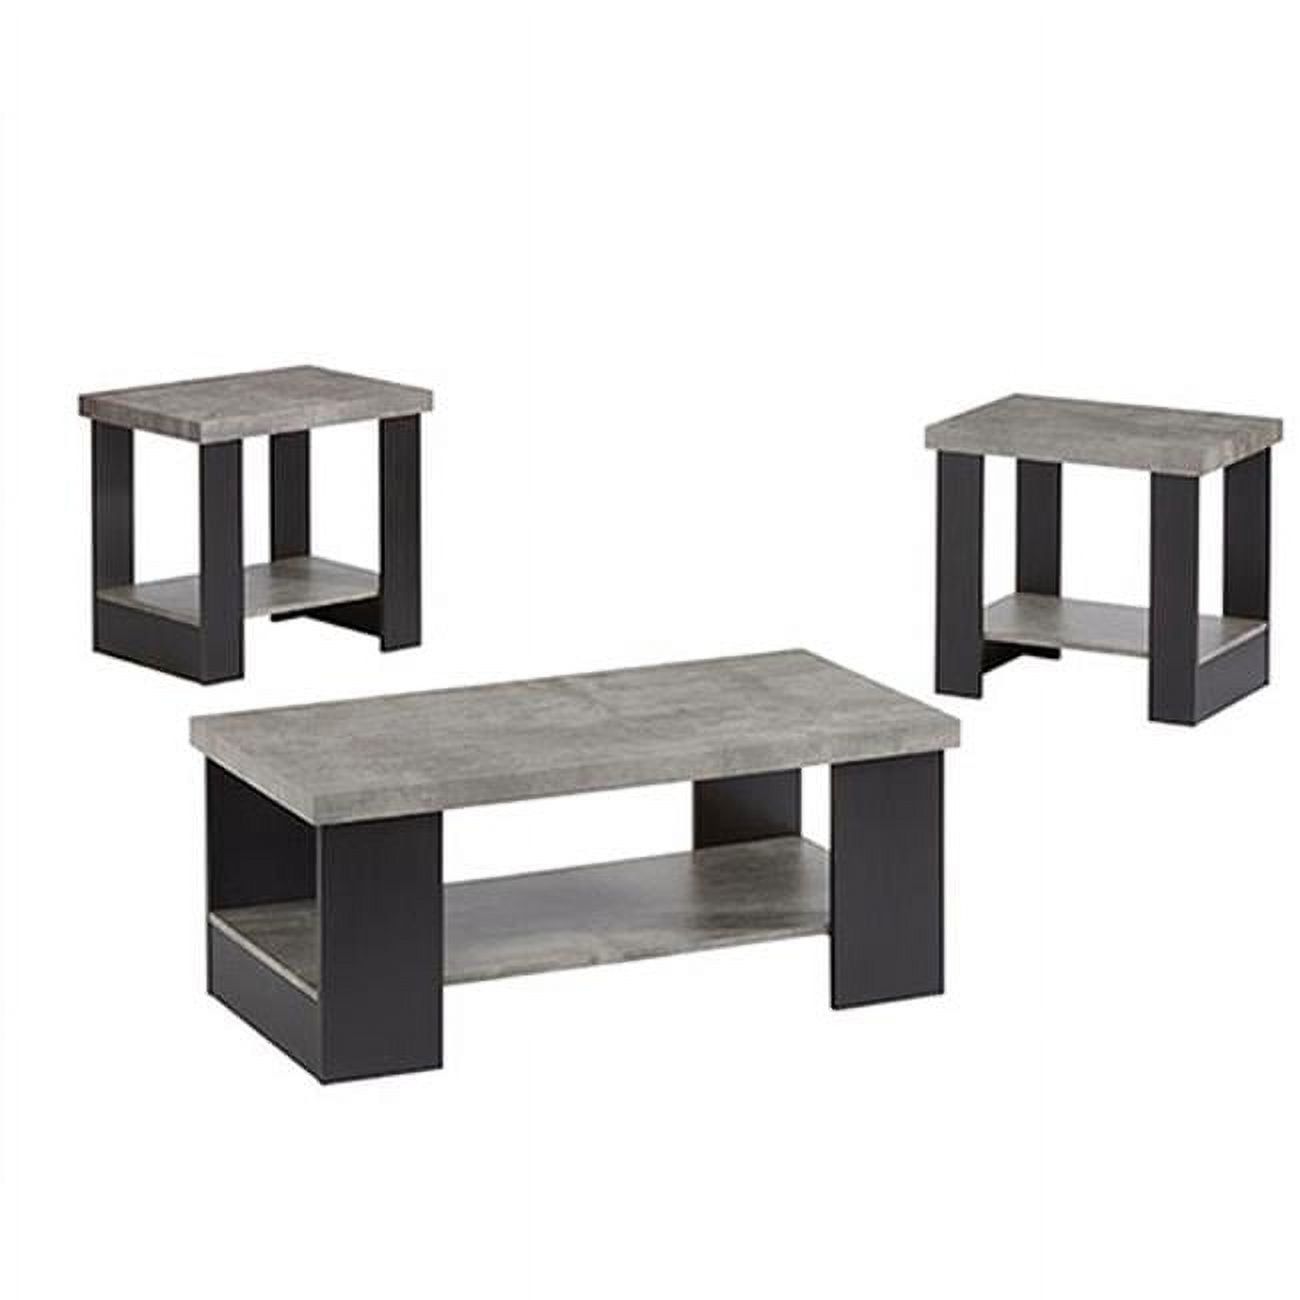 Progressive Furniture T247 95 Living Room Cocktail Table & 2 End Tables,  Black & Gray – Pack Of 3 – Walmart Intended For Progressive Furniture Cocktail Tables (View 15 of 15)